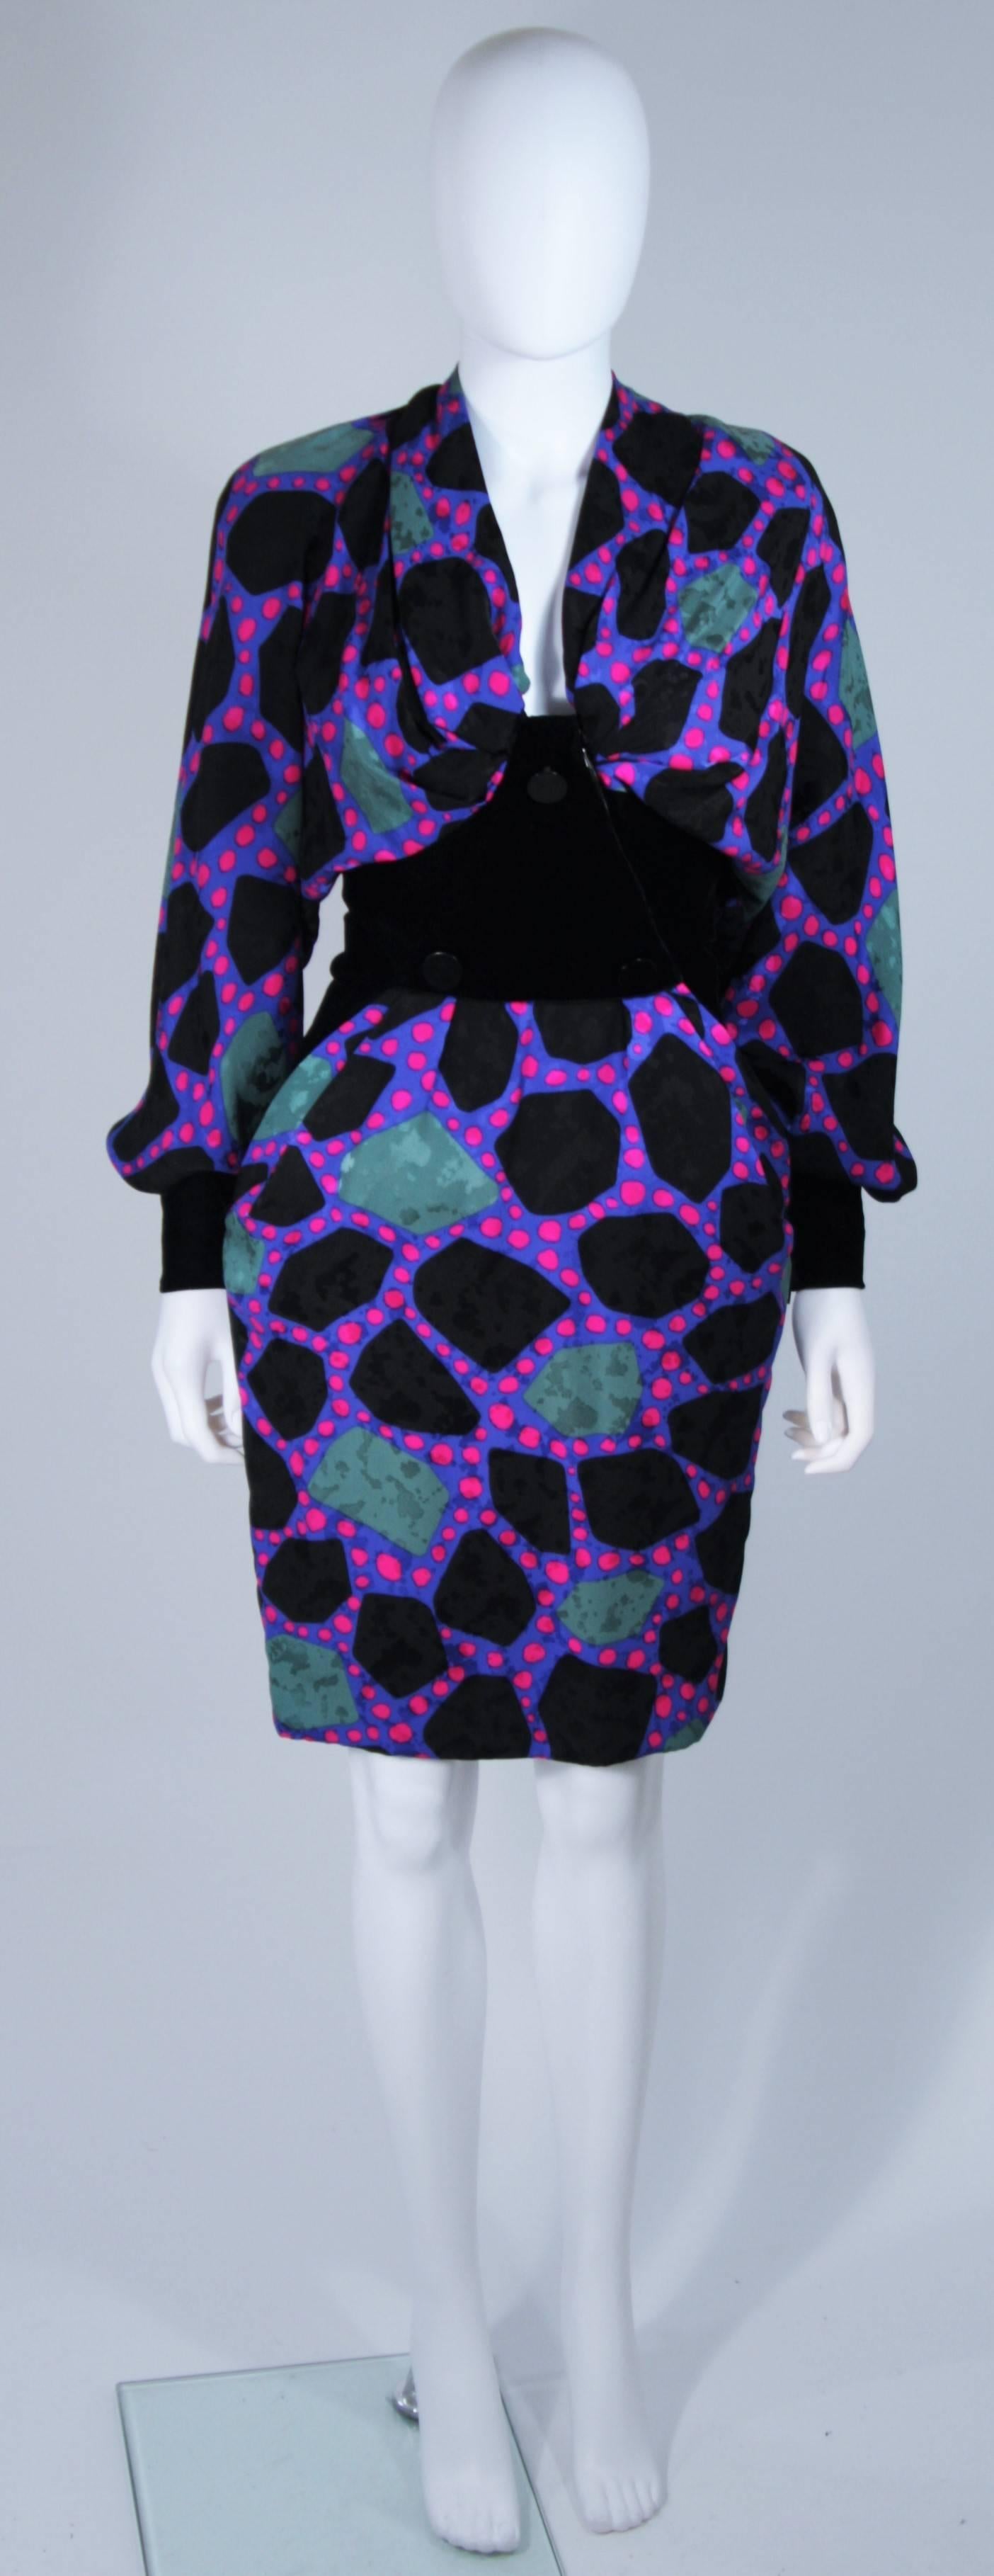  This Jacqueline De Ribes Couture dress is composed of a printed silk in a wonderfully contrasting magenta, purple, teal, and black combination. The draped design features a velvet waist, sleeves, and button applique. There are front pockets,